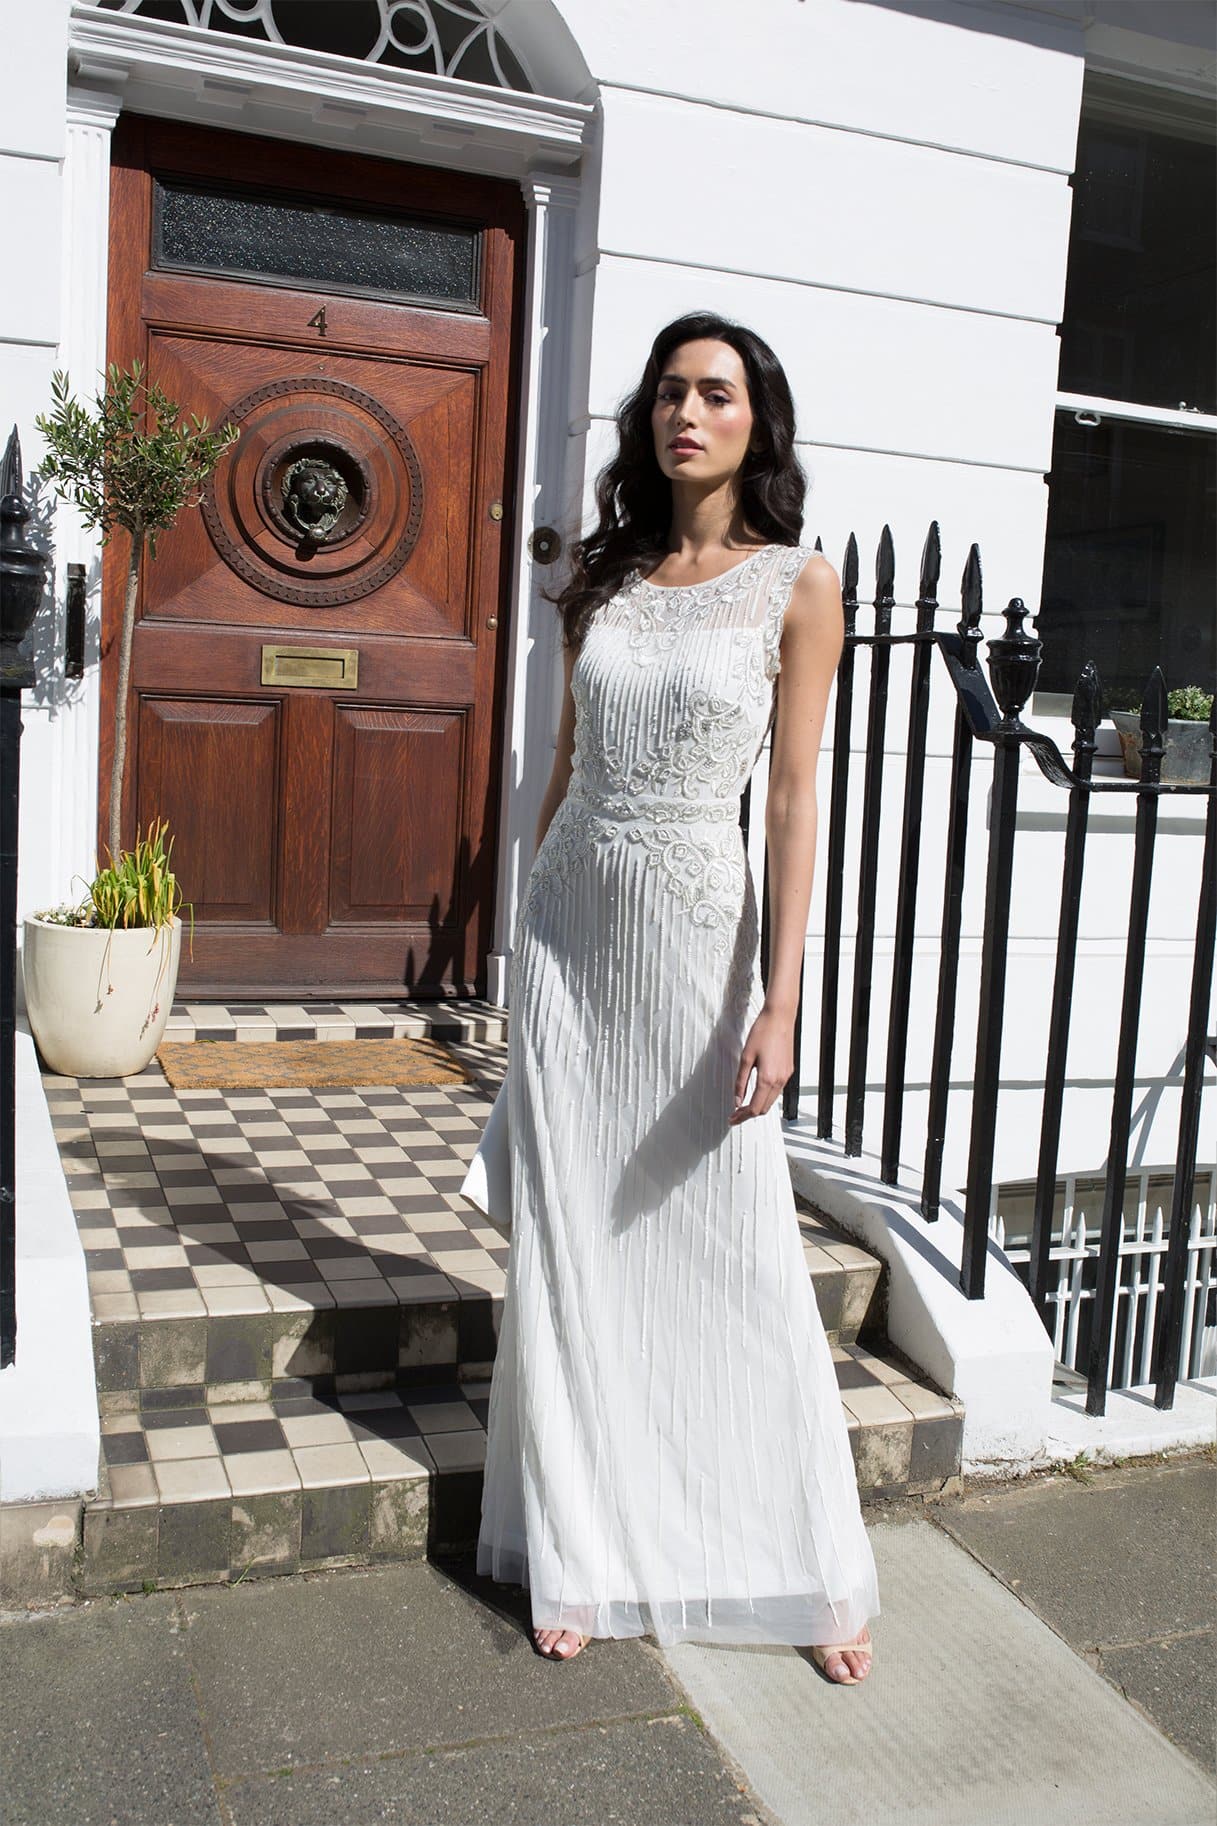 White Scoop Neck Bridal Gown 